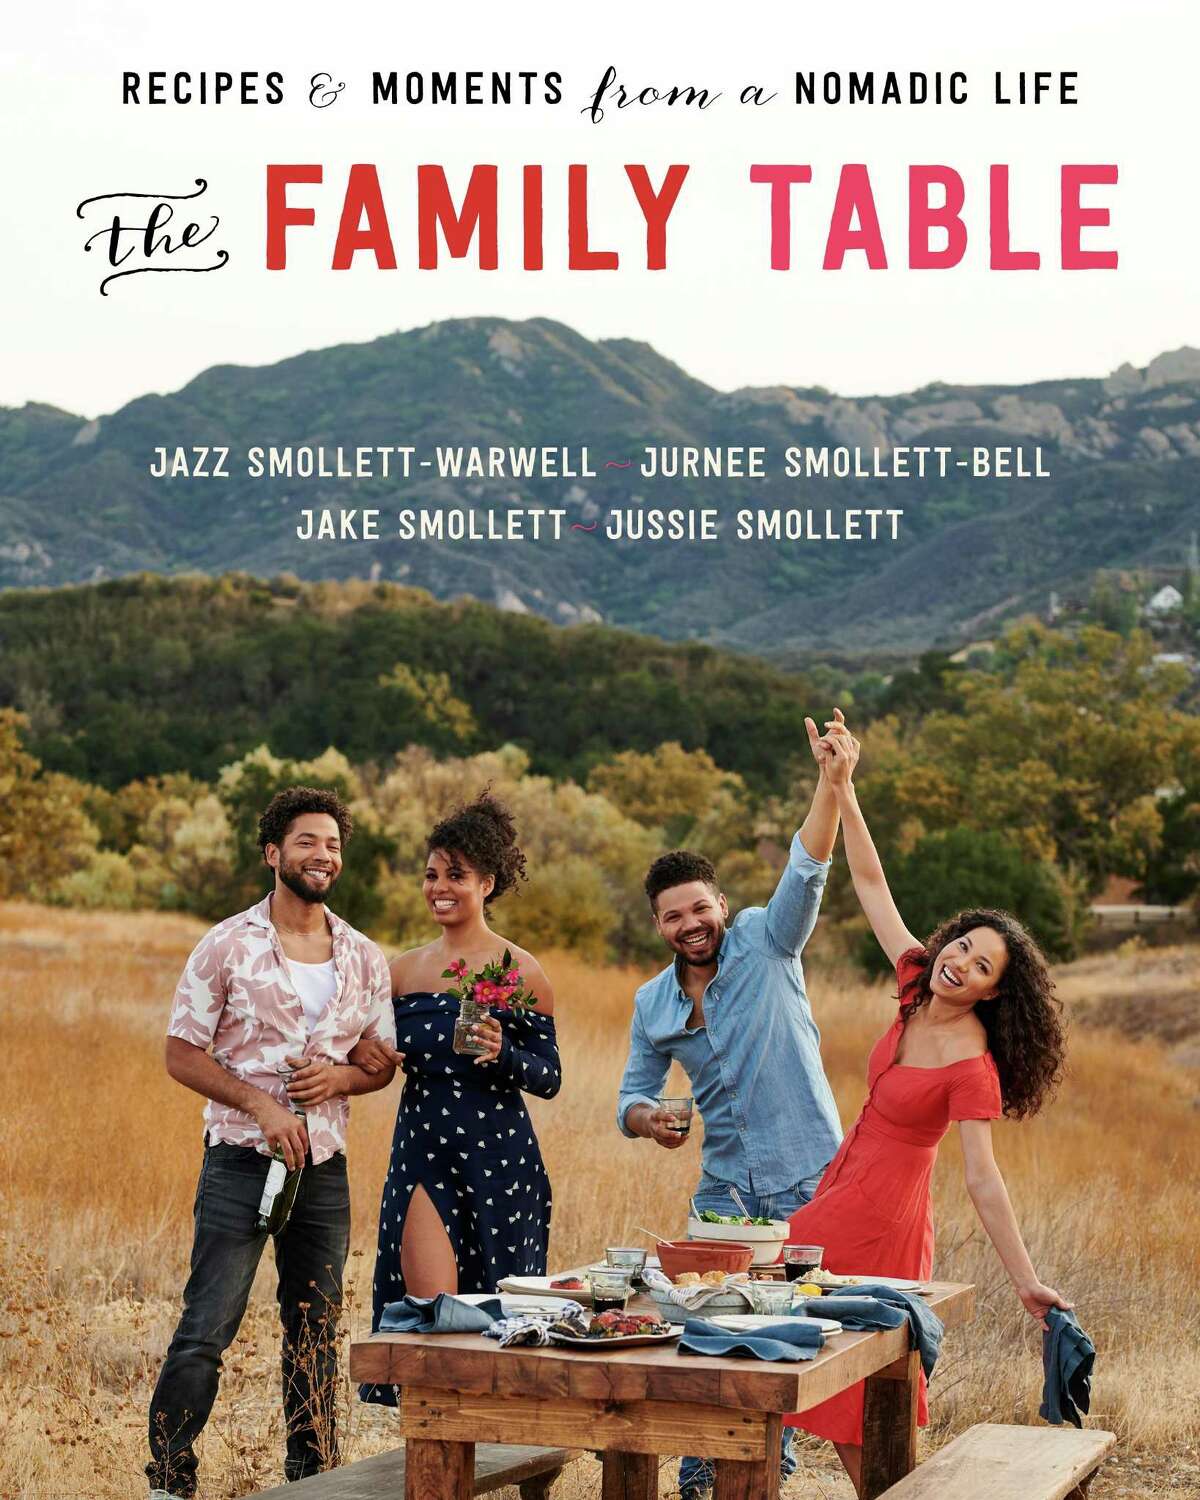 Cover of "The Family Table: Recipes & Moments from a Nomadic Life" by Jazz Smollett-Warwell, Jake Smollett, Jurnee Smollett-Bell and Jussie Smollet.